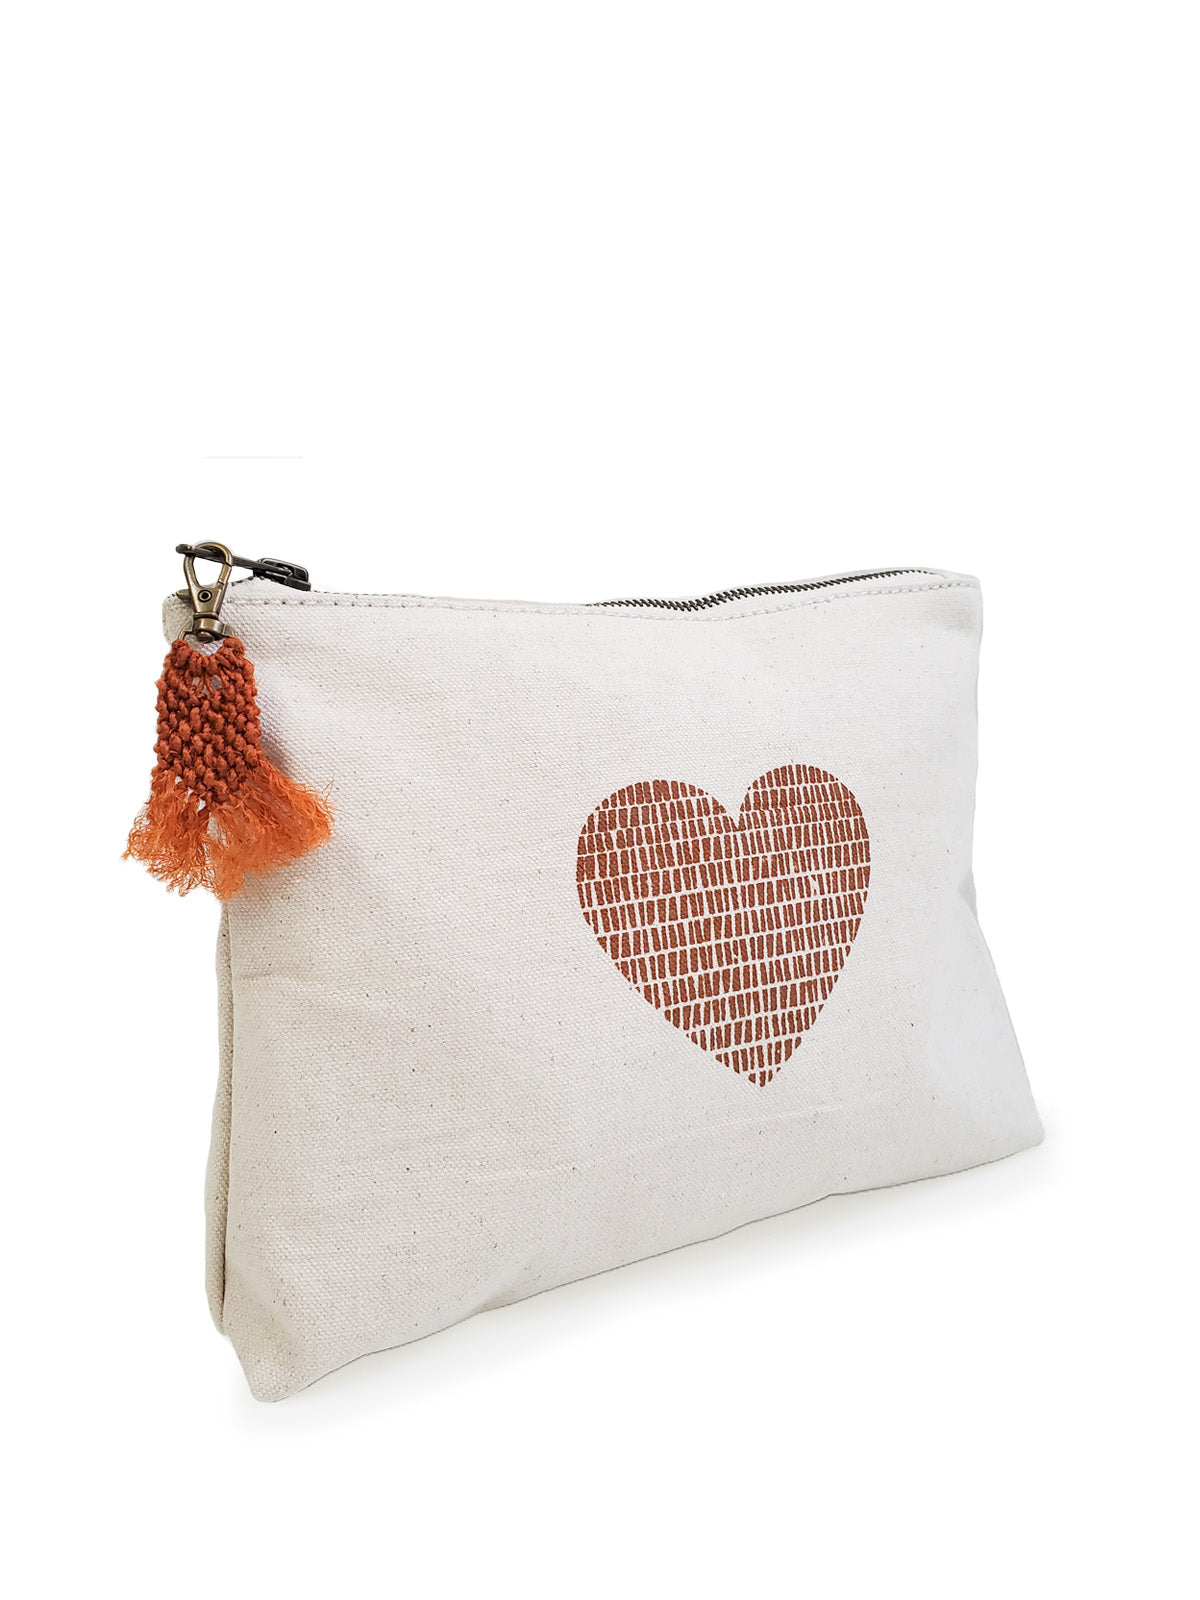 Hand Screen Printed Cotton Canvas Pouch - Love-4